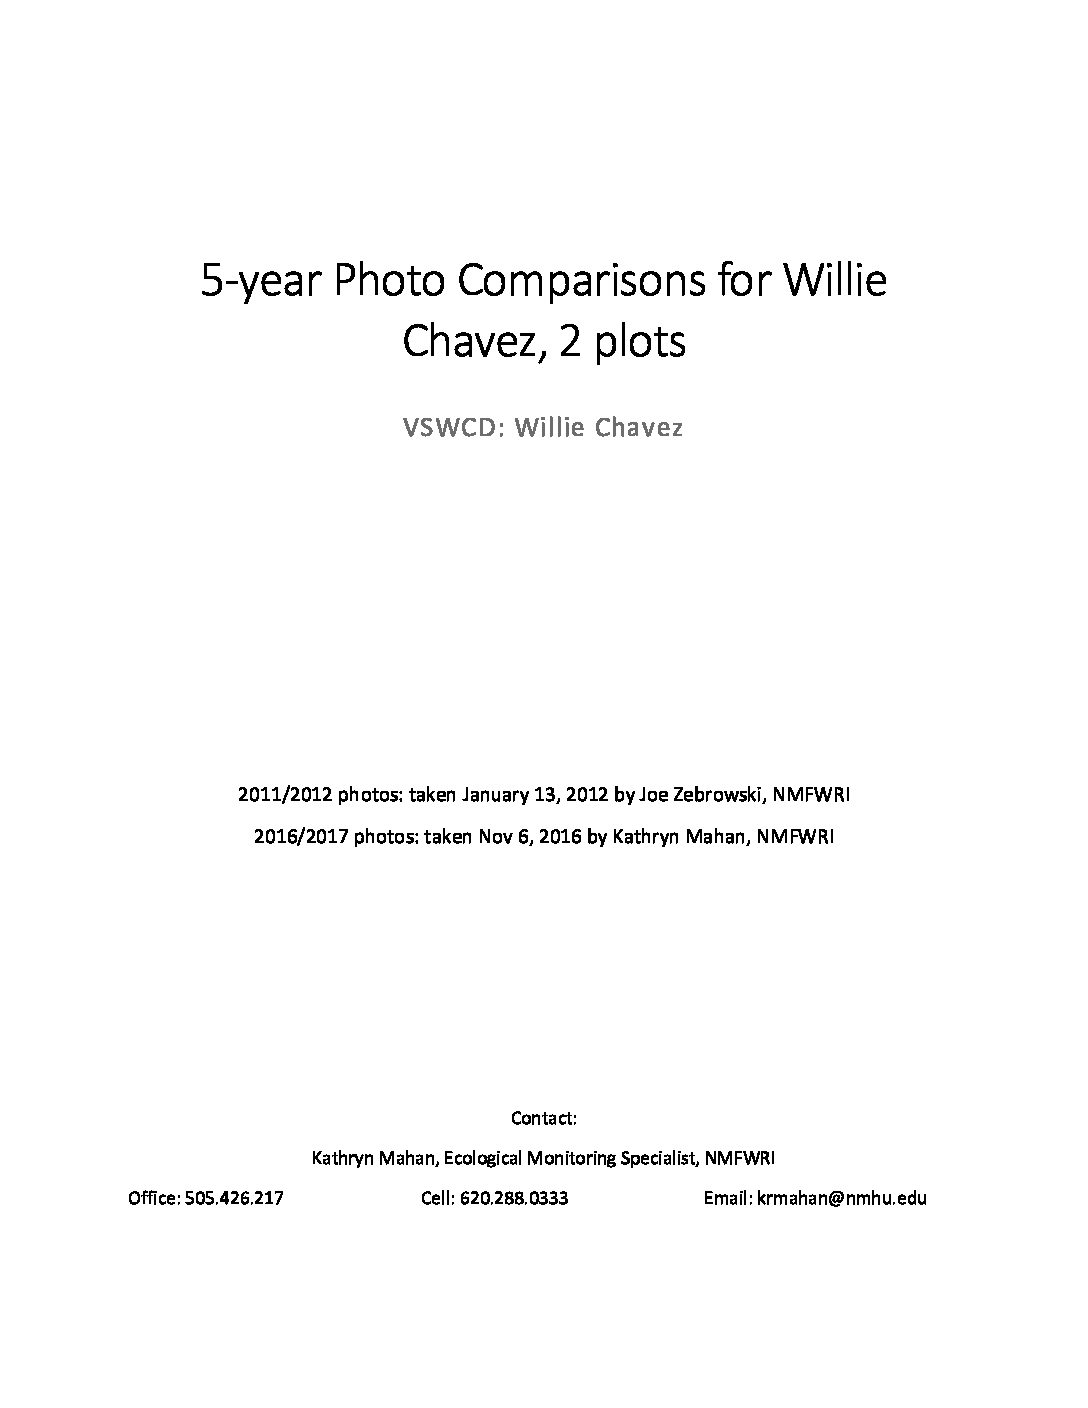 5-year Photo Comparisons for Willie Chavez, 2 plots